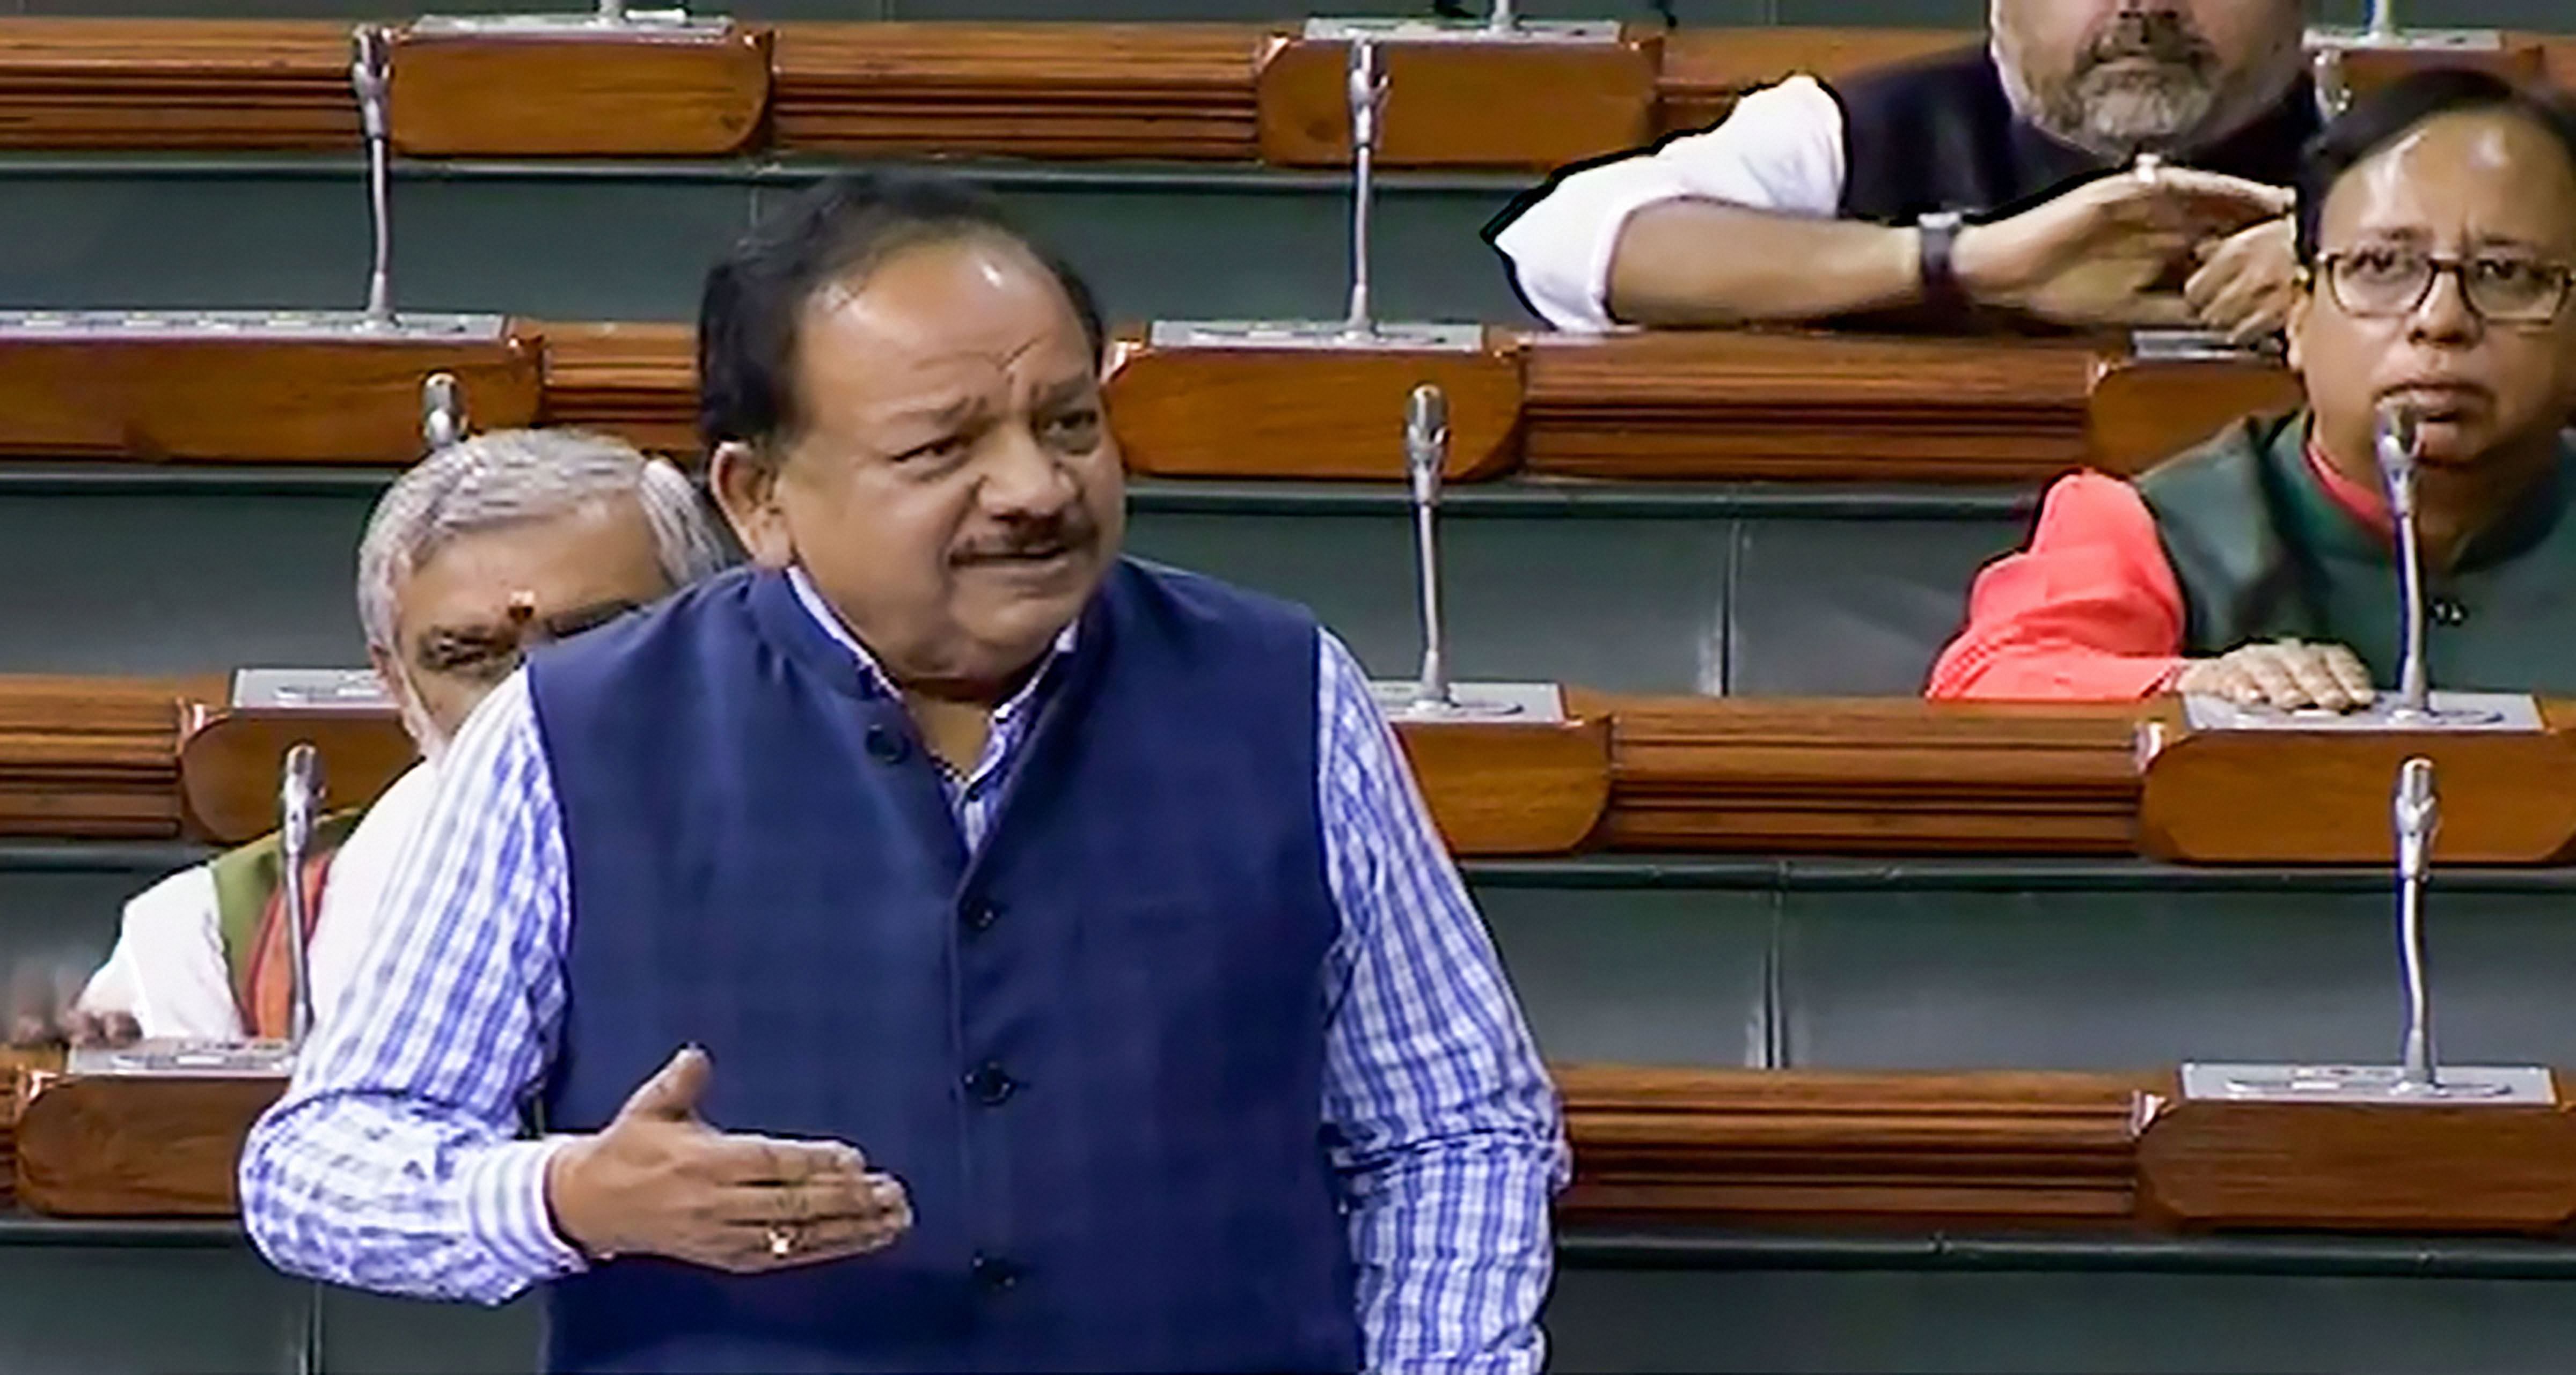 Union Health Minister Harsh Vardhan speaks in the Lok Sabha during the Winter Session of Parliament, in New Delhi, Wednesday, Nov. 27, 2019. (PTI Photo)